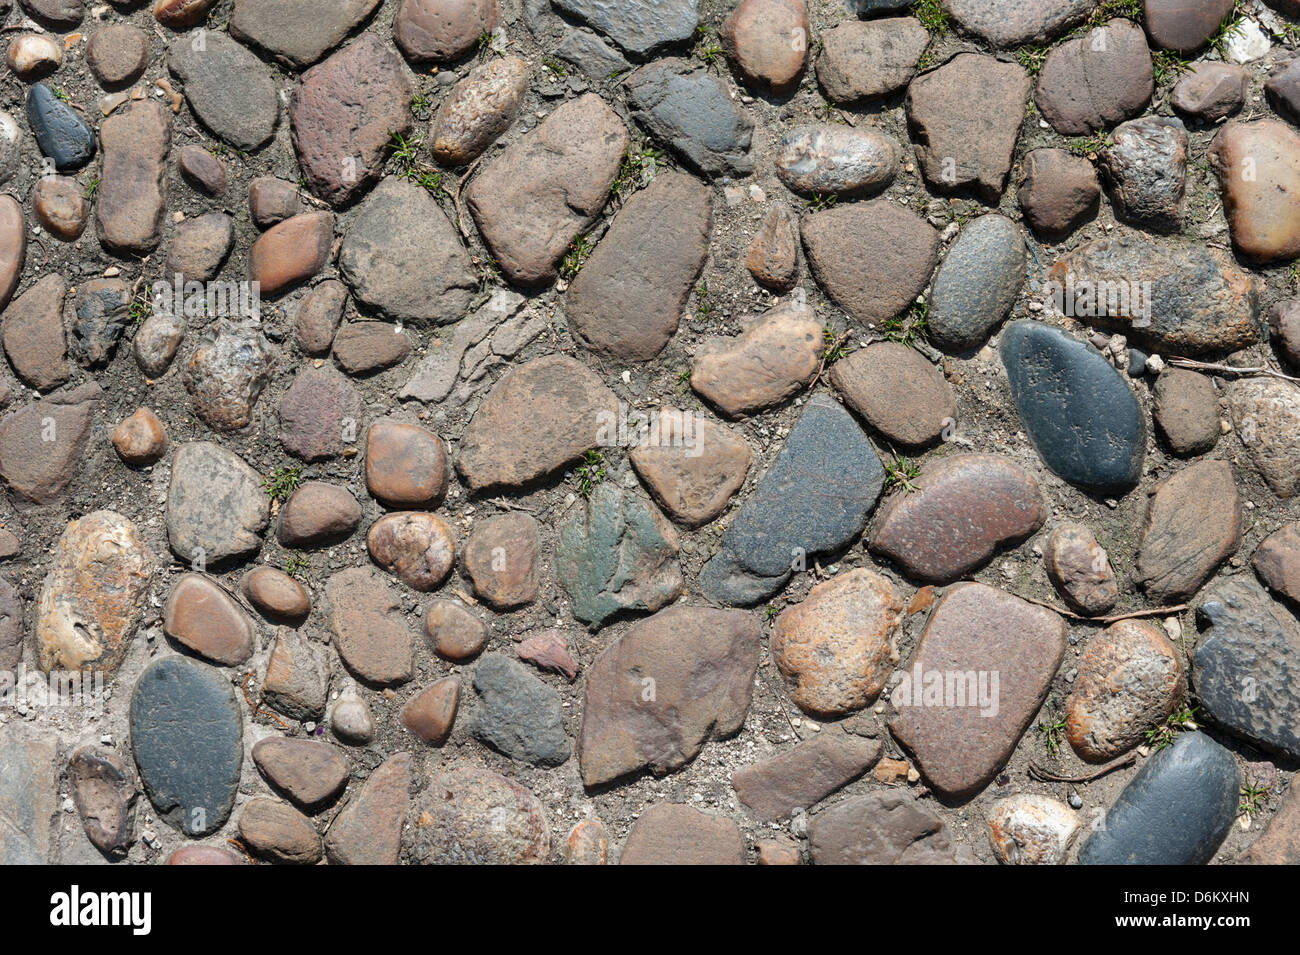 Abstract pattern of cobble stones or cobbles Stock Photo